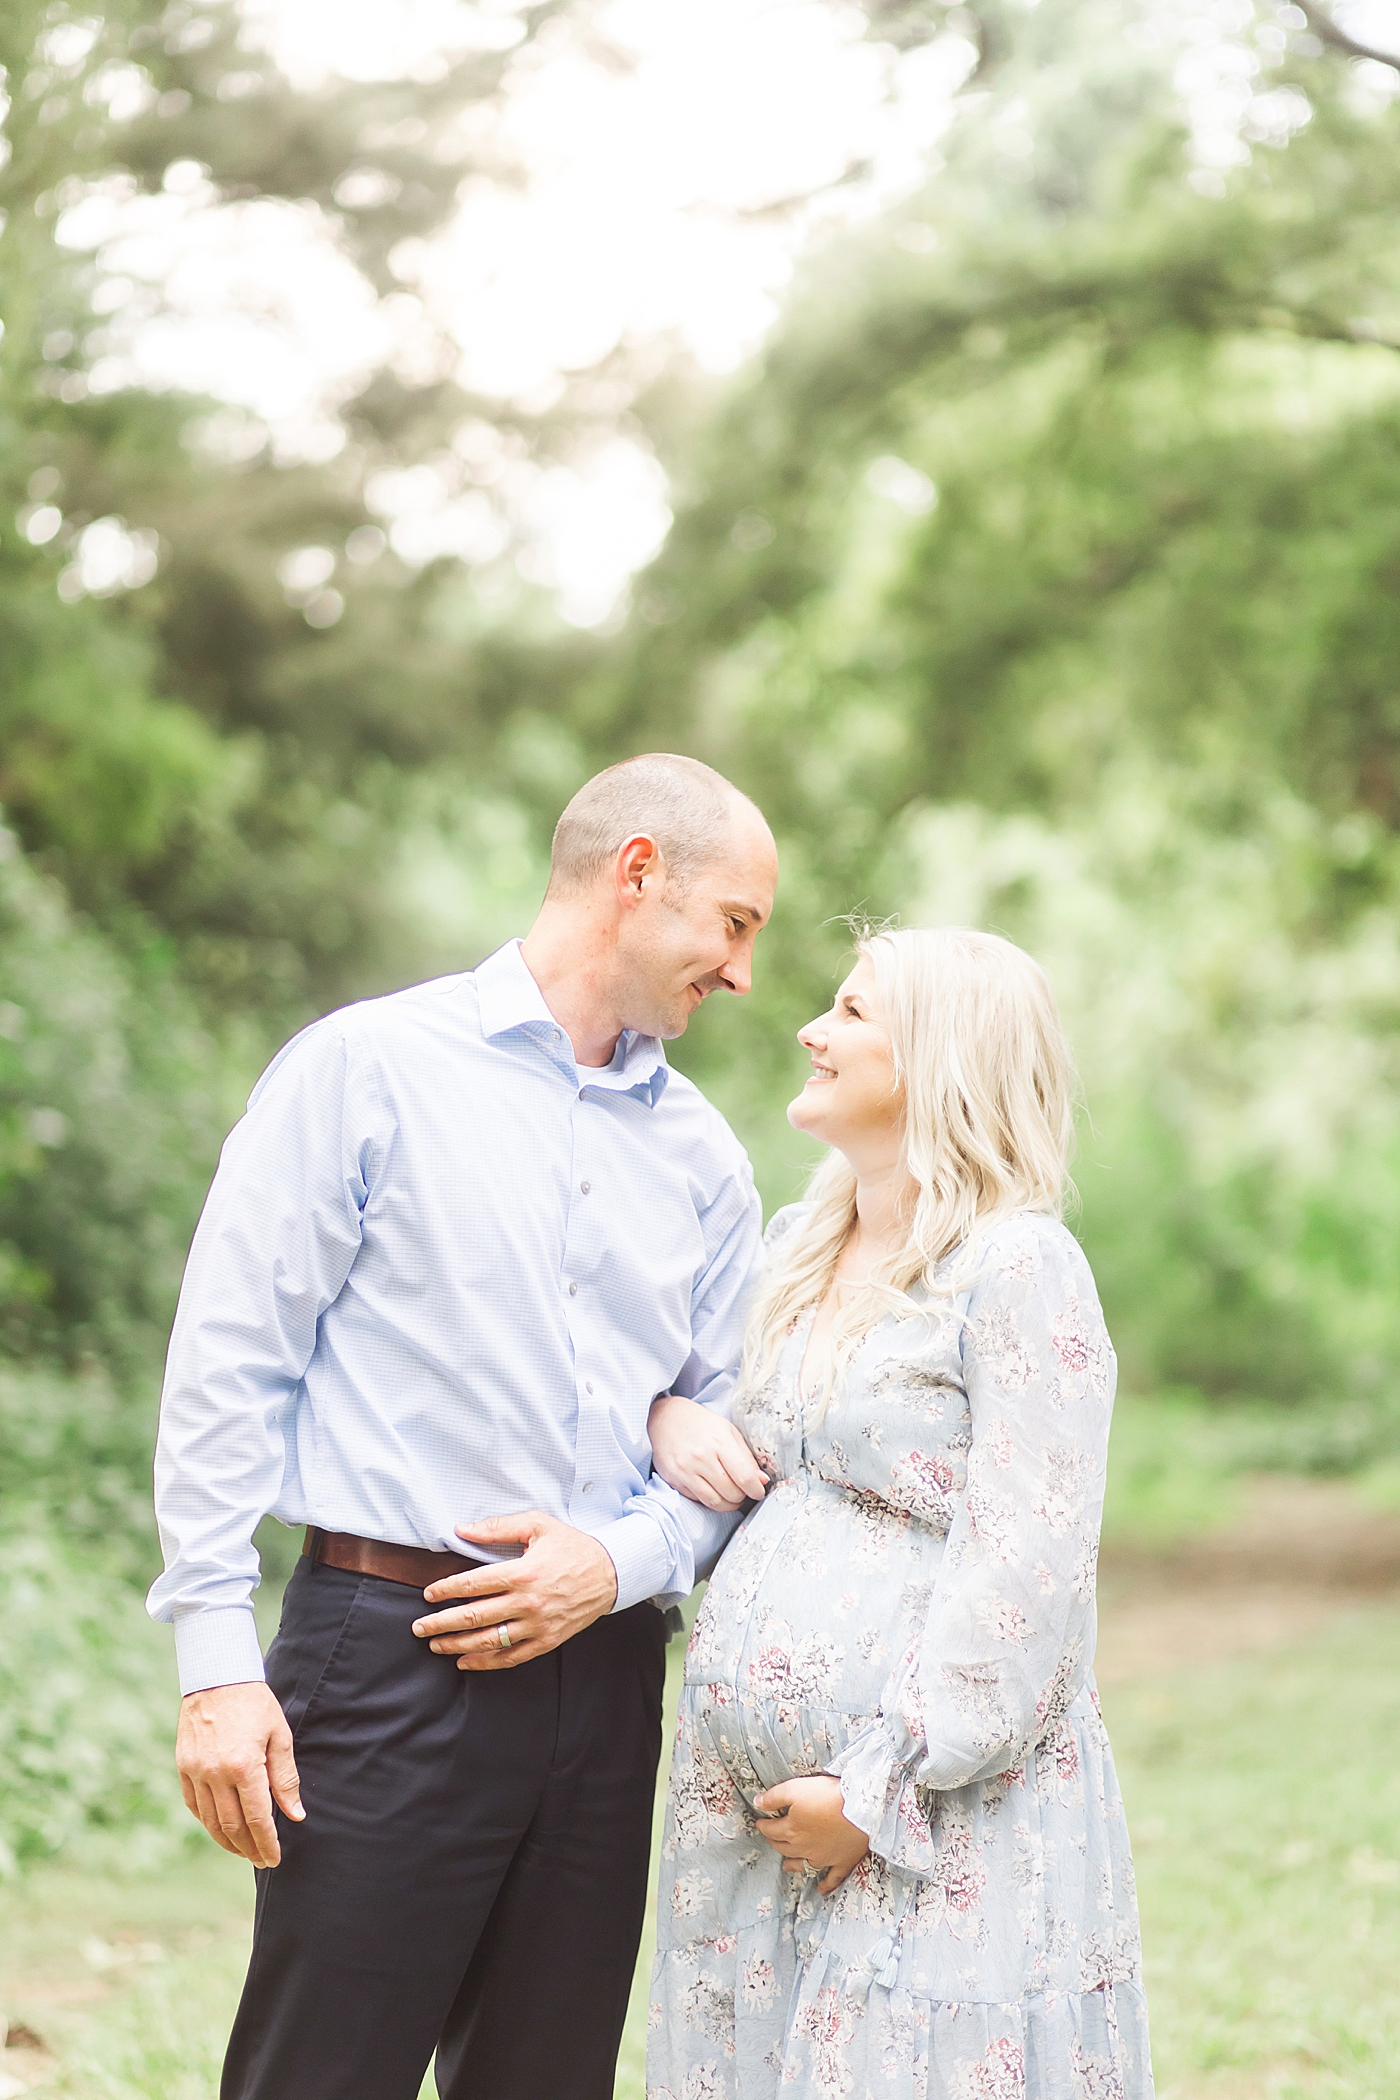 Parents looking at each other during maternity session at White Oak Bayou. Photo by Fresh Light Photography.